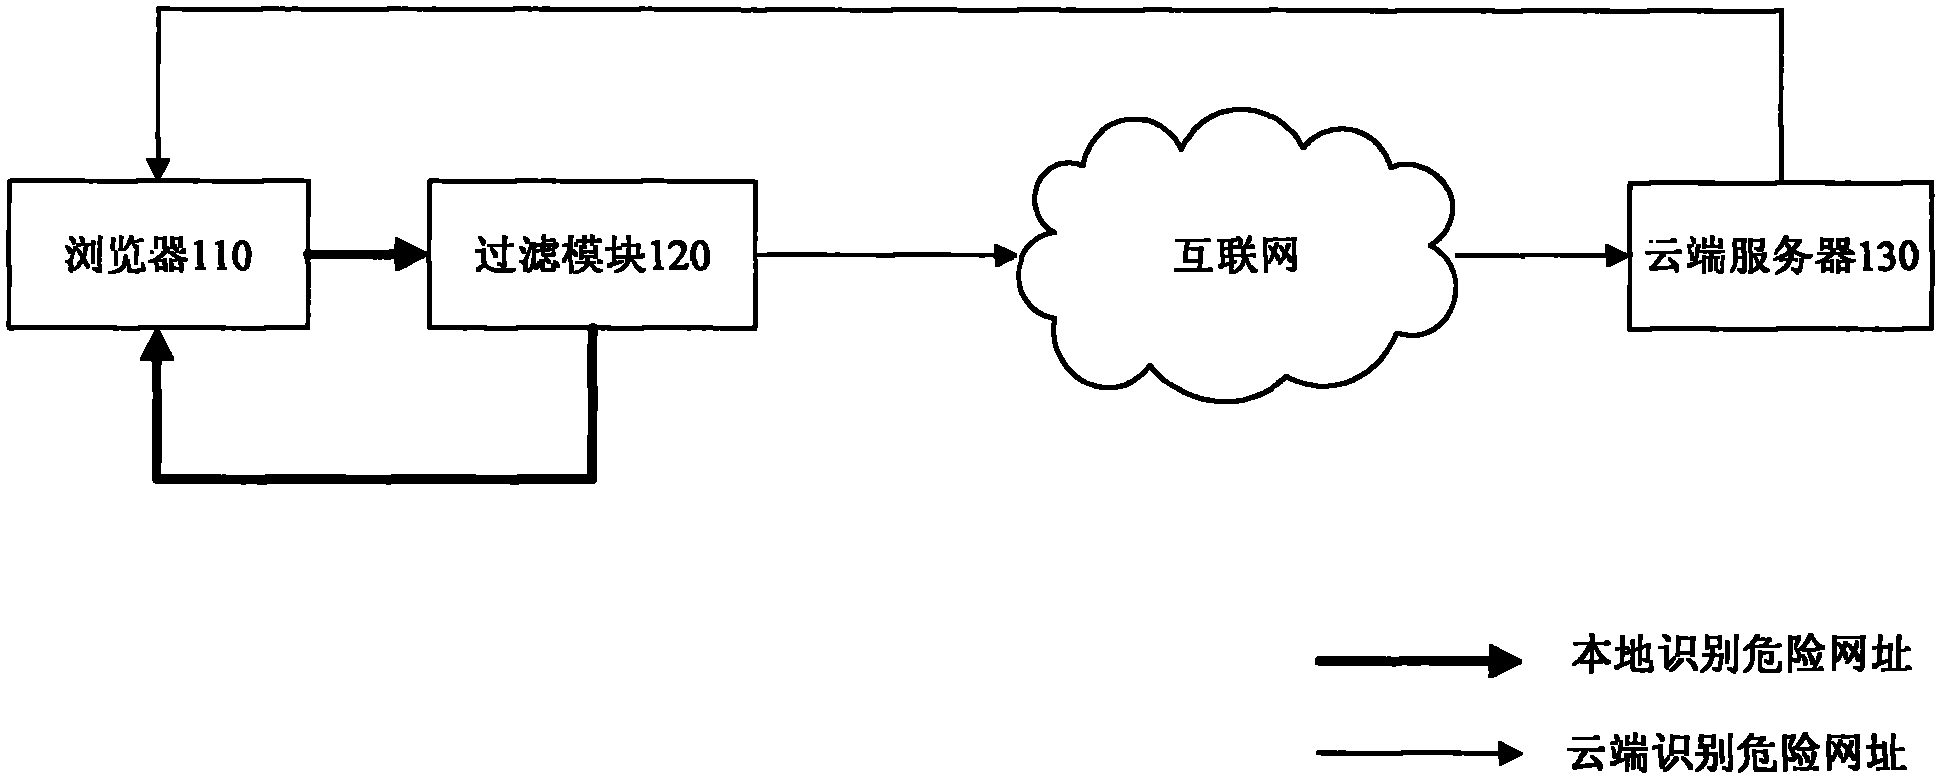 Method and system for safely browsing webpage